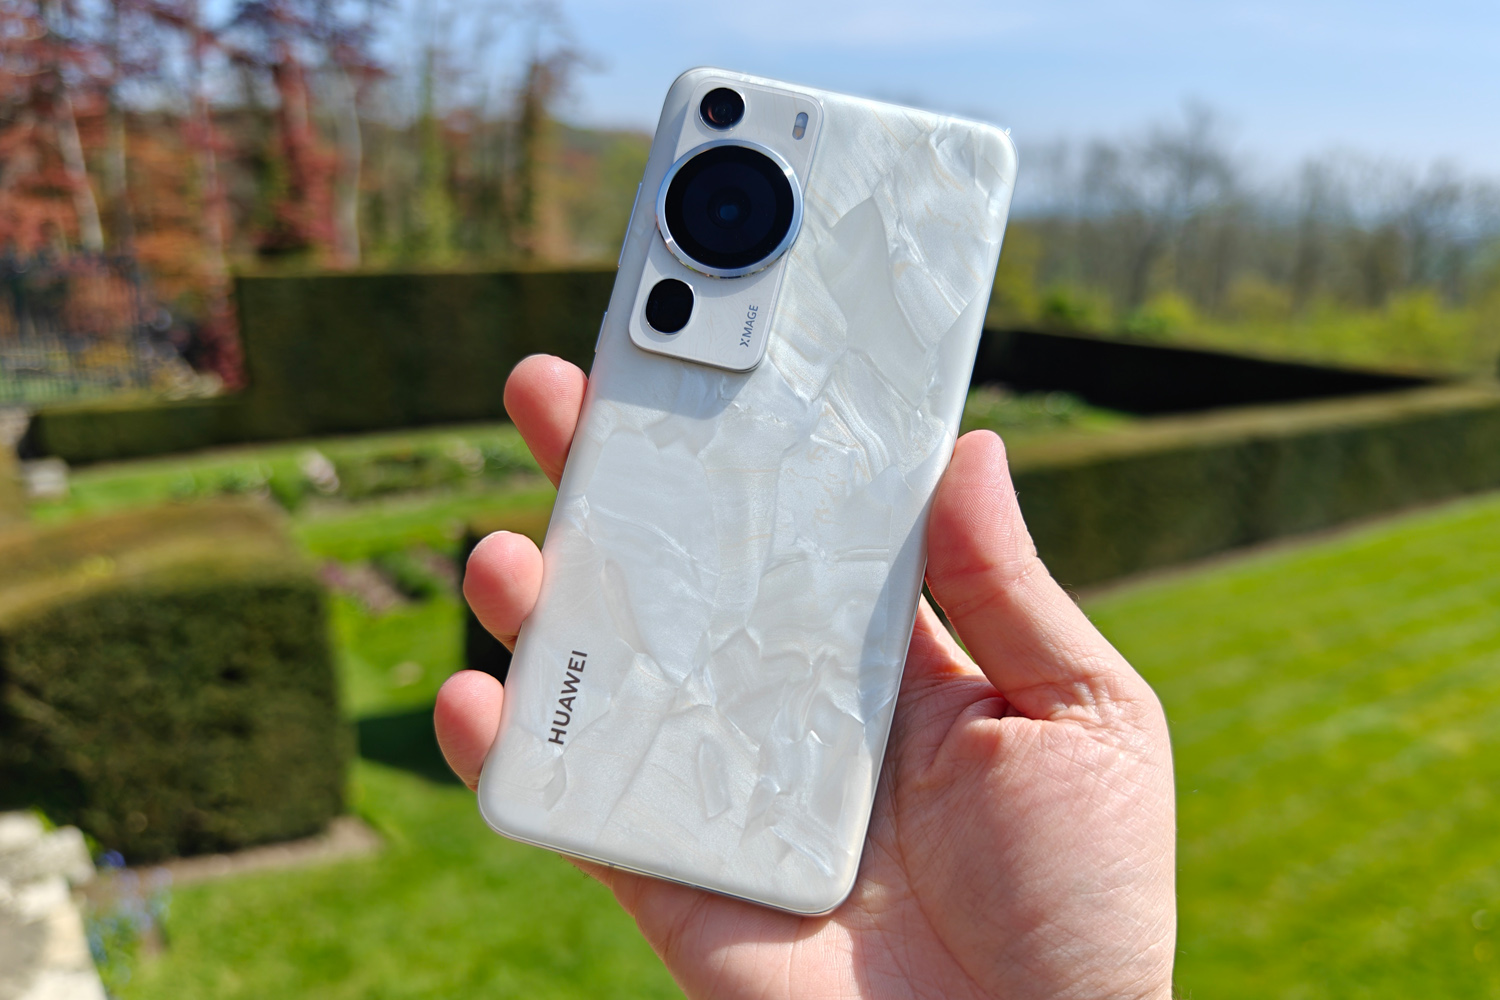 Huawei P60 Pro hands-on review: seeing the light